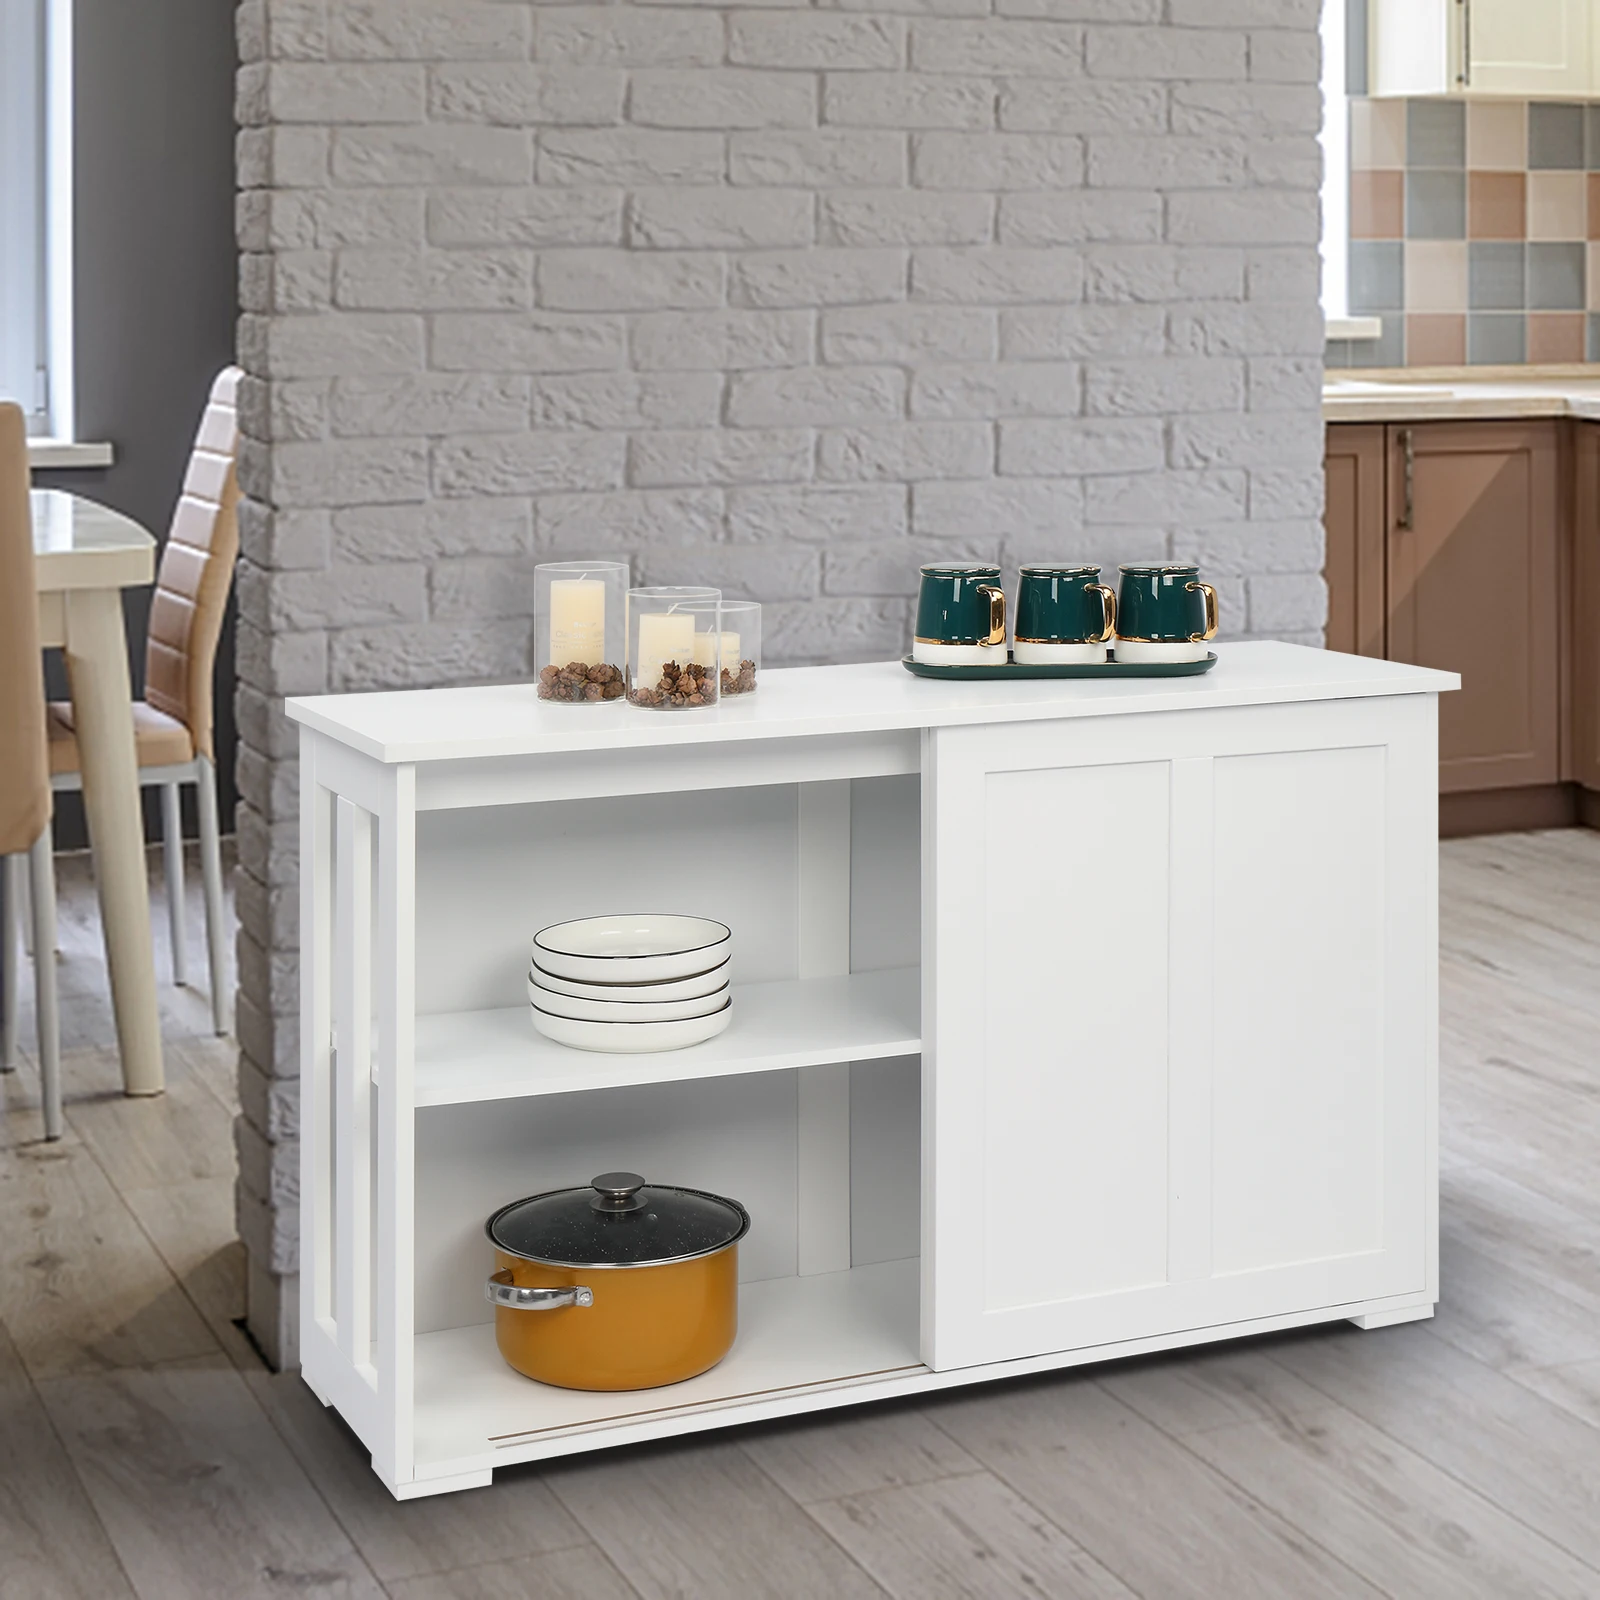 

FCH Double Sliding Door Sideboard Porch Cabinet White/Black[US-Stock]